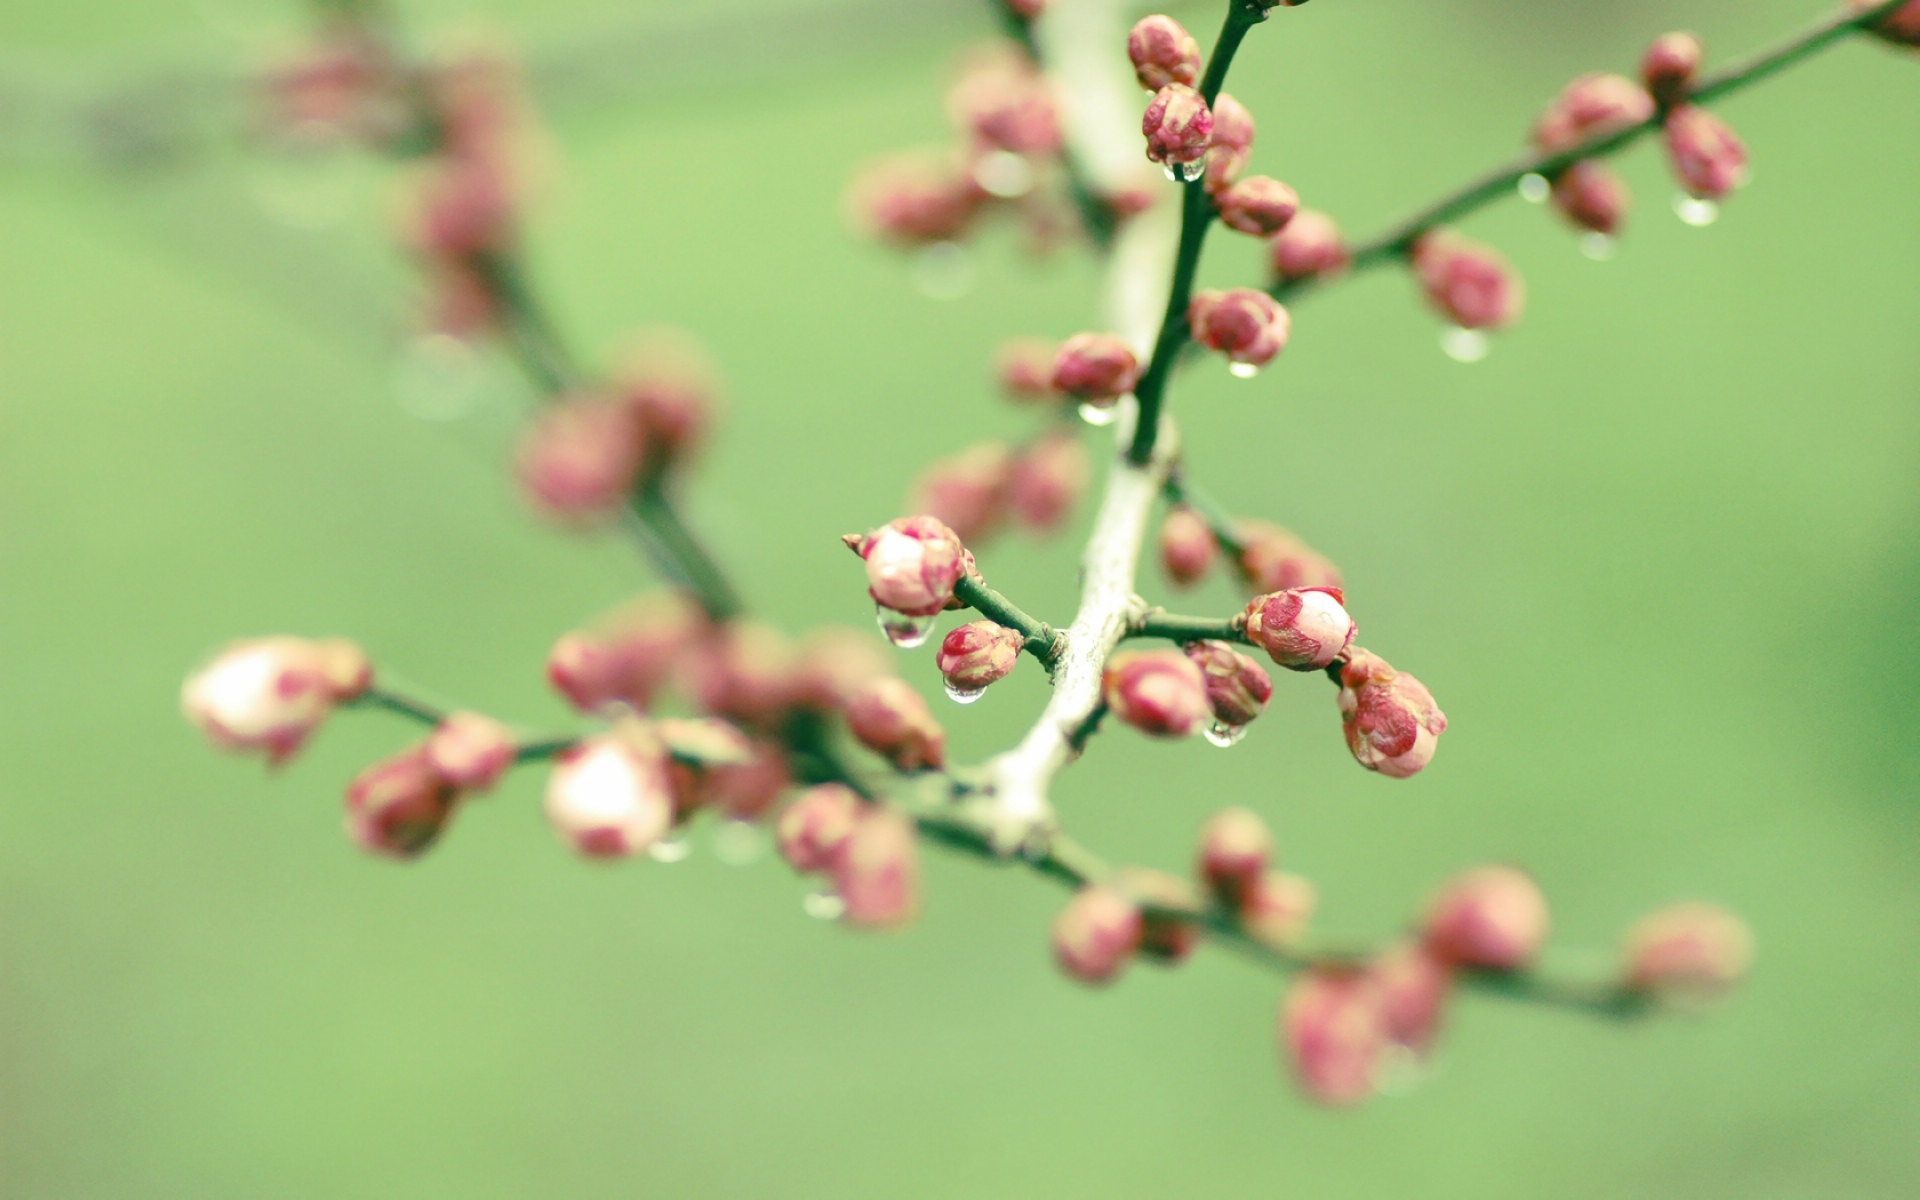 Spring buds on the trees HD wallpapers #11 - 1920x1200